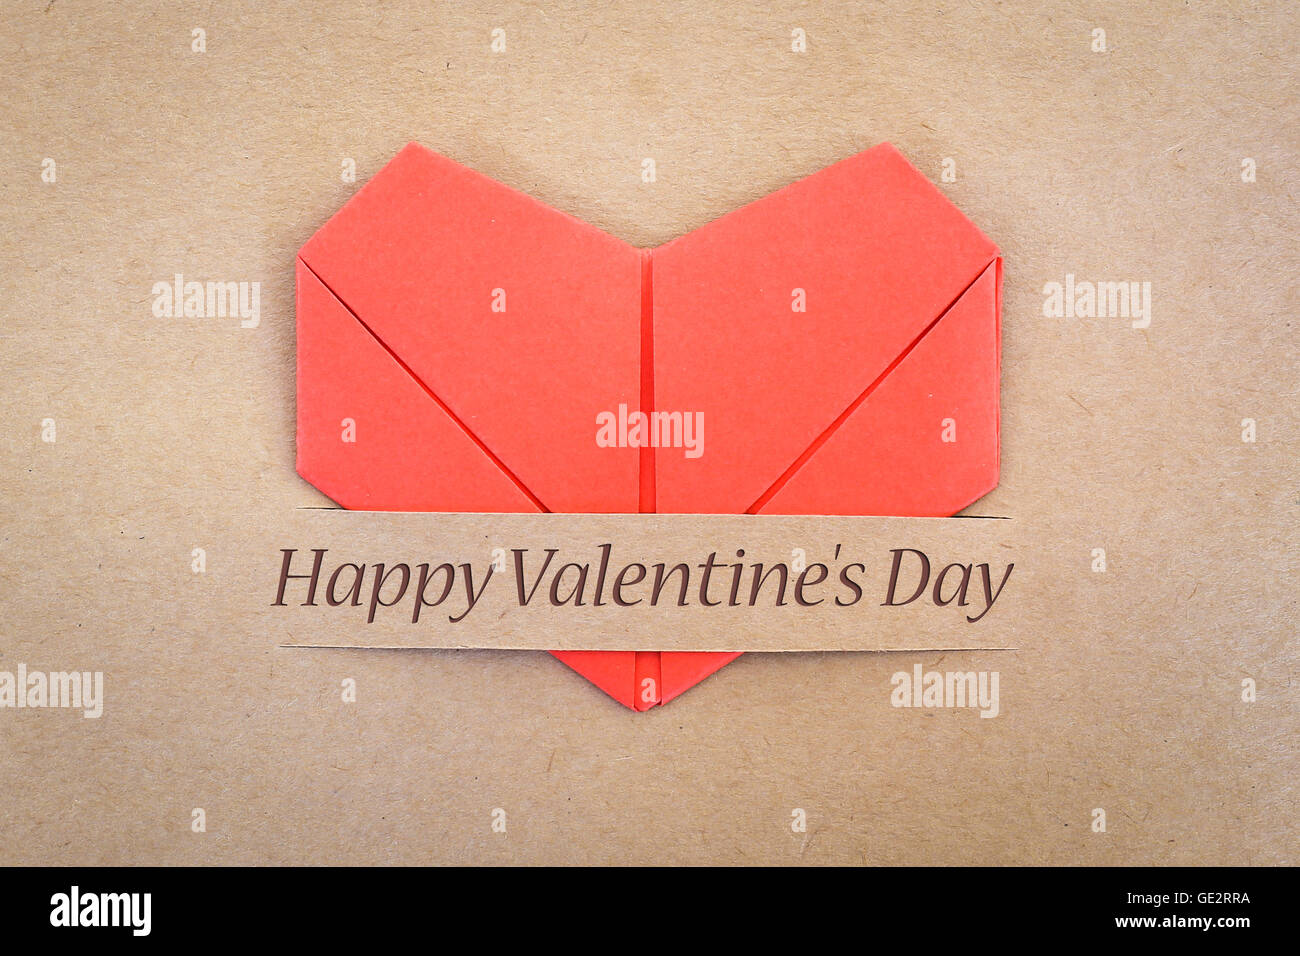 Valentine card, The heart shape paper on brown with 'I love you' label Stock Photo